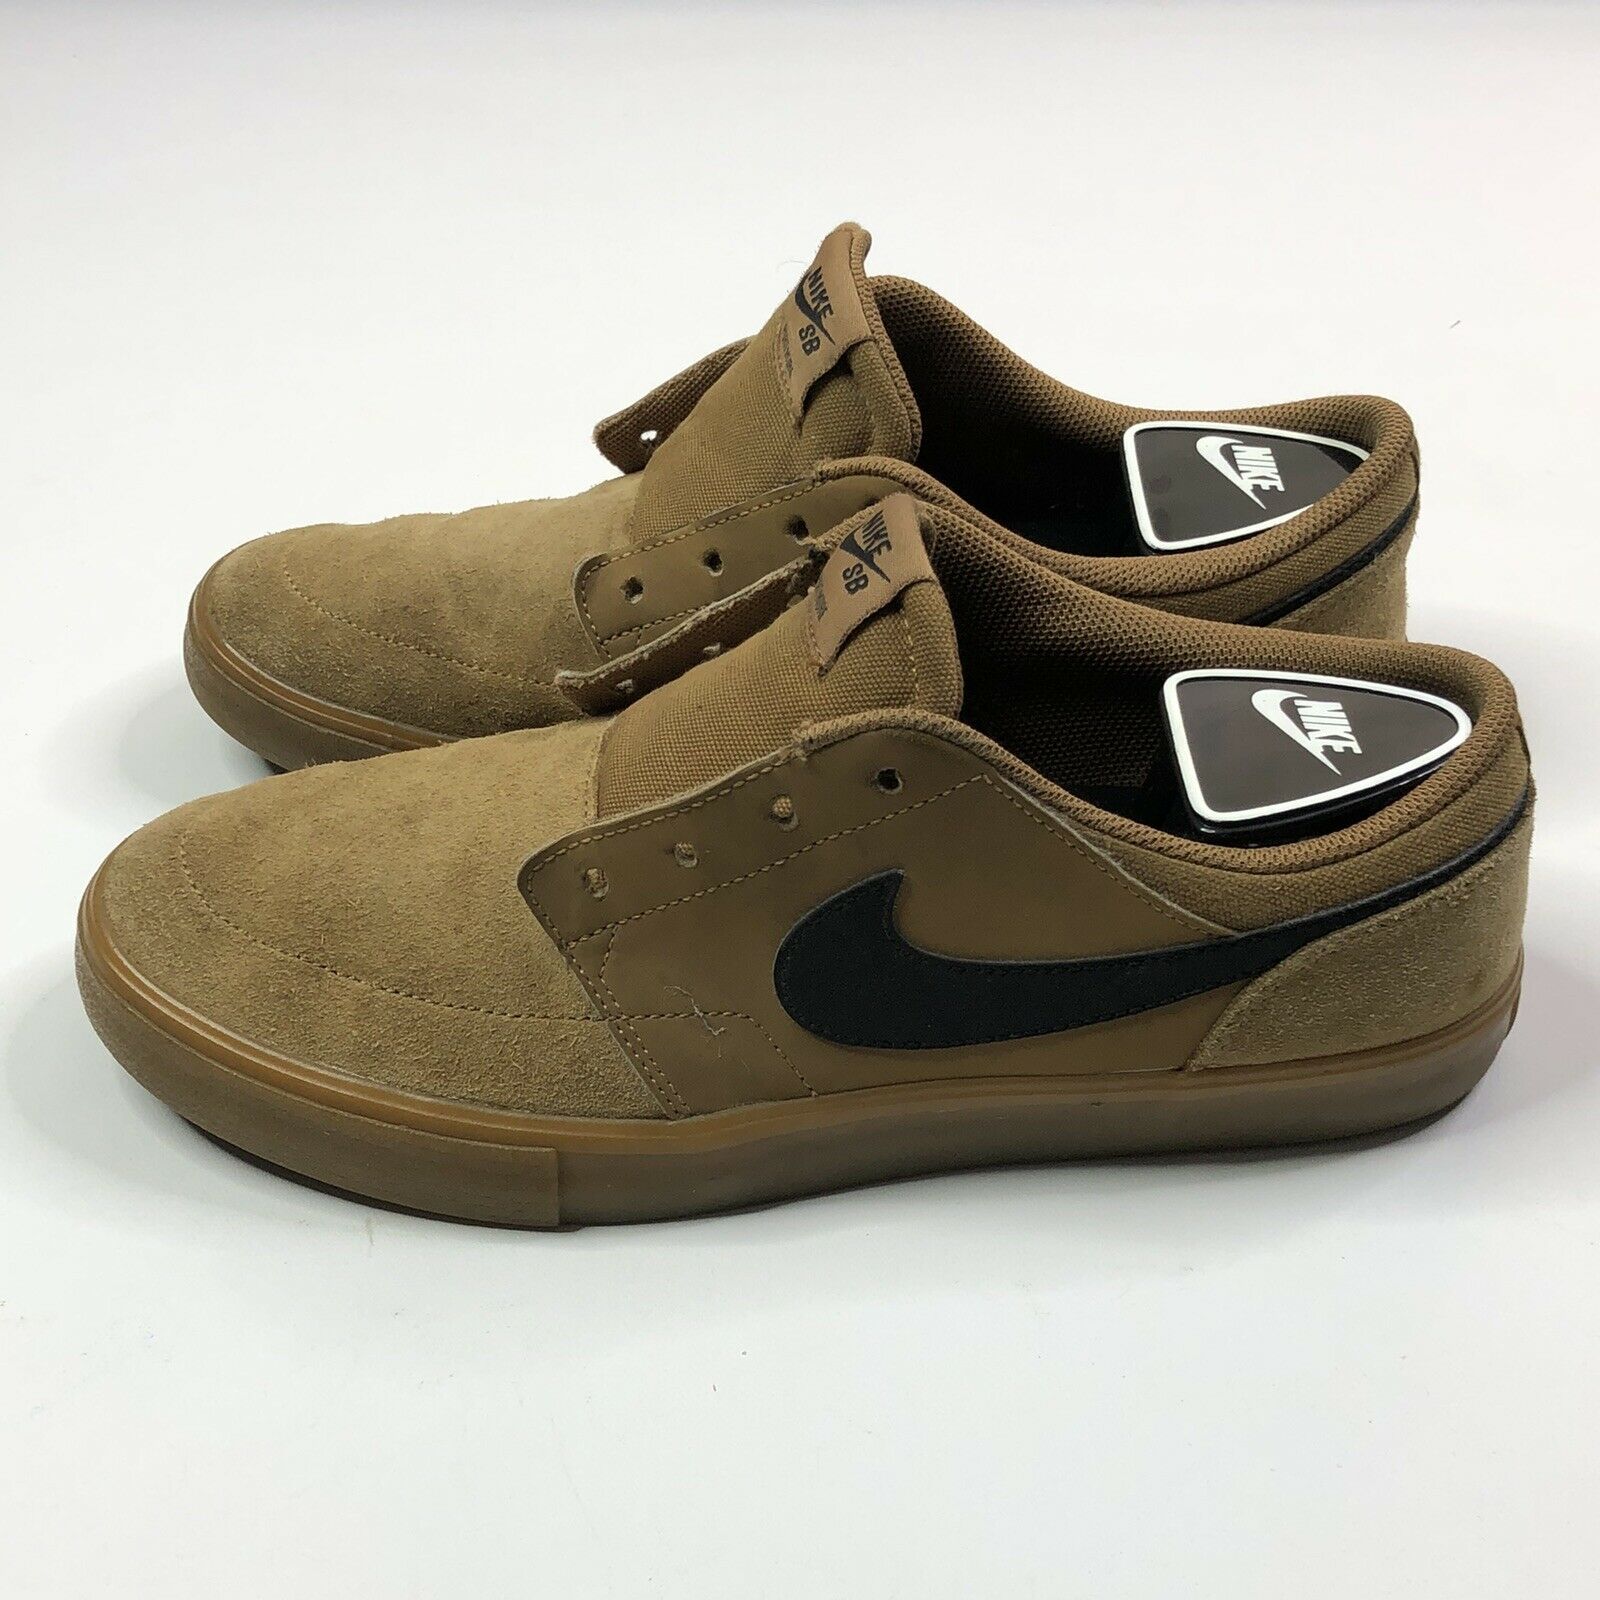 Nike Mens SB Portmore II 880266-209 Brown Skate Shoes No Laces Low Top Size 8